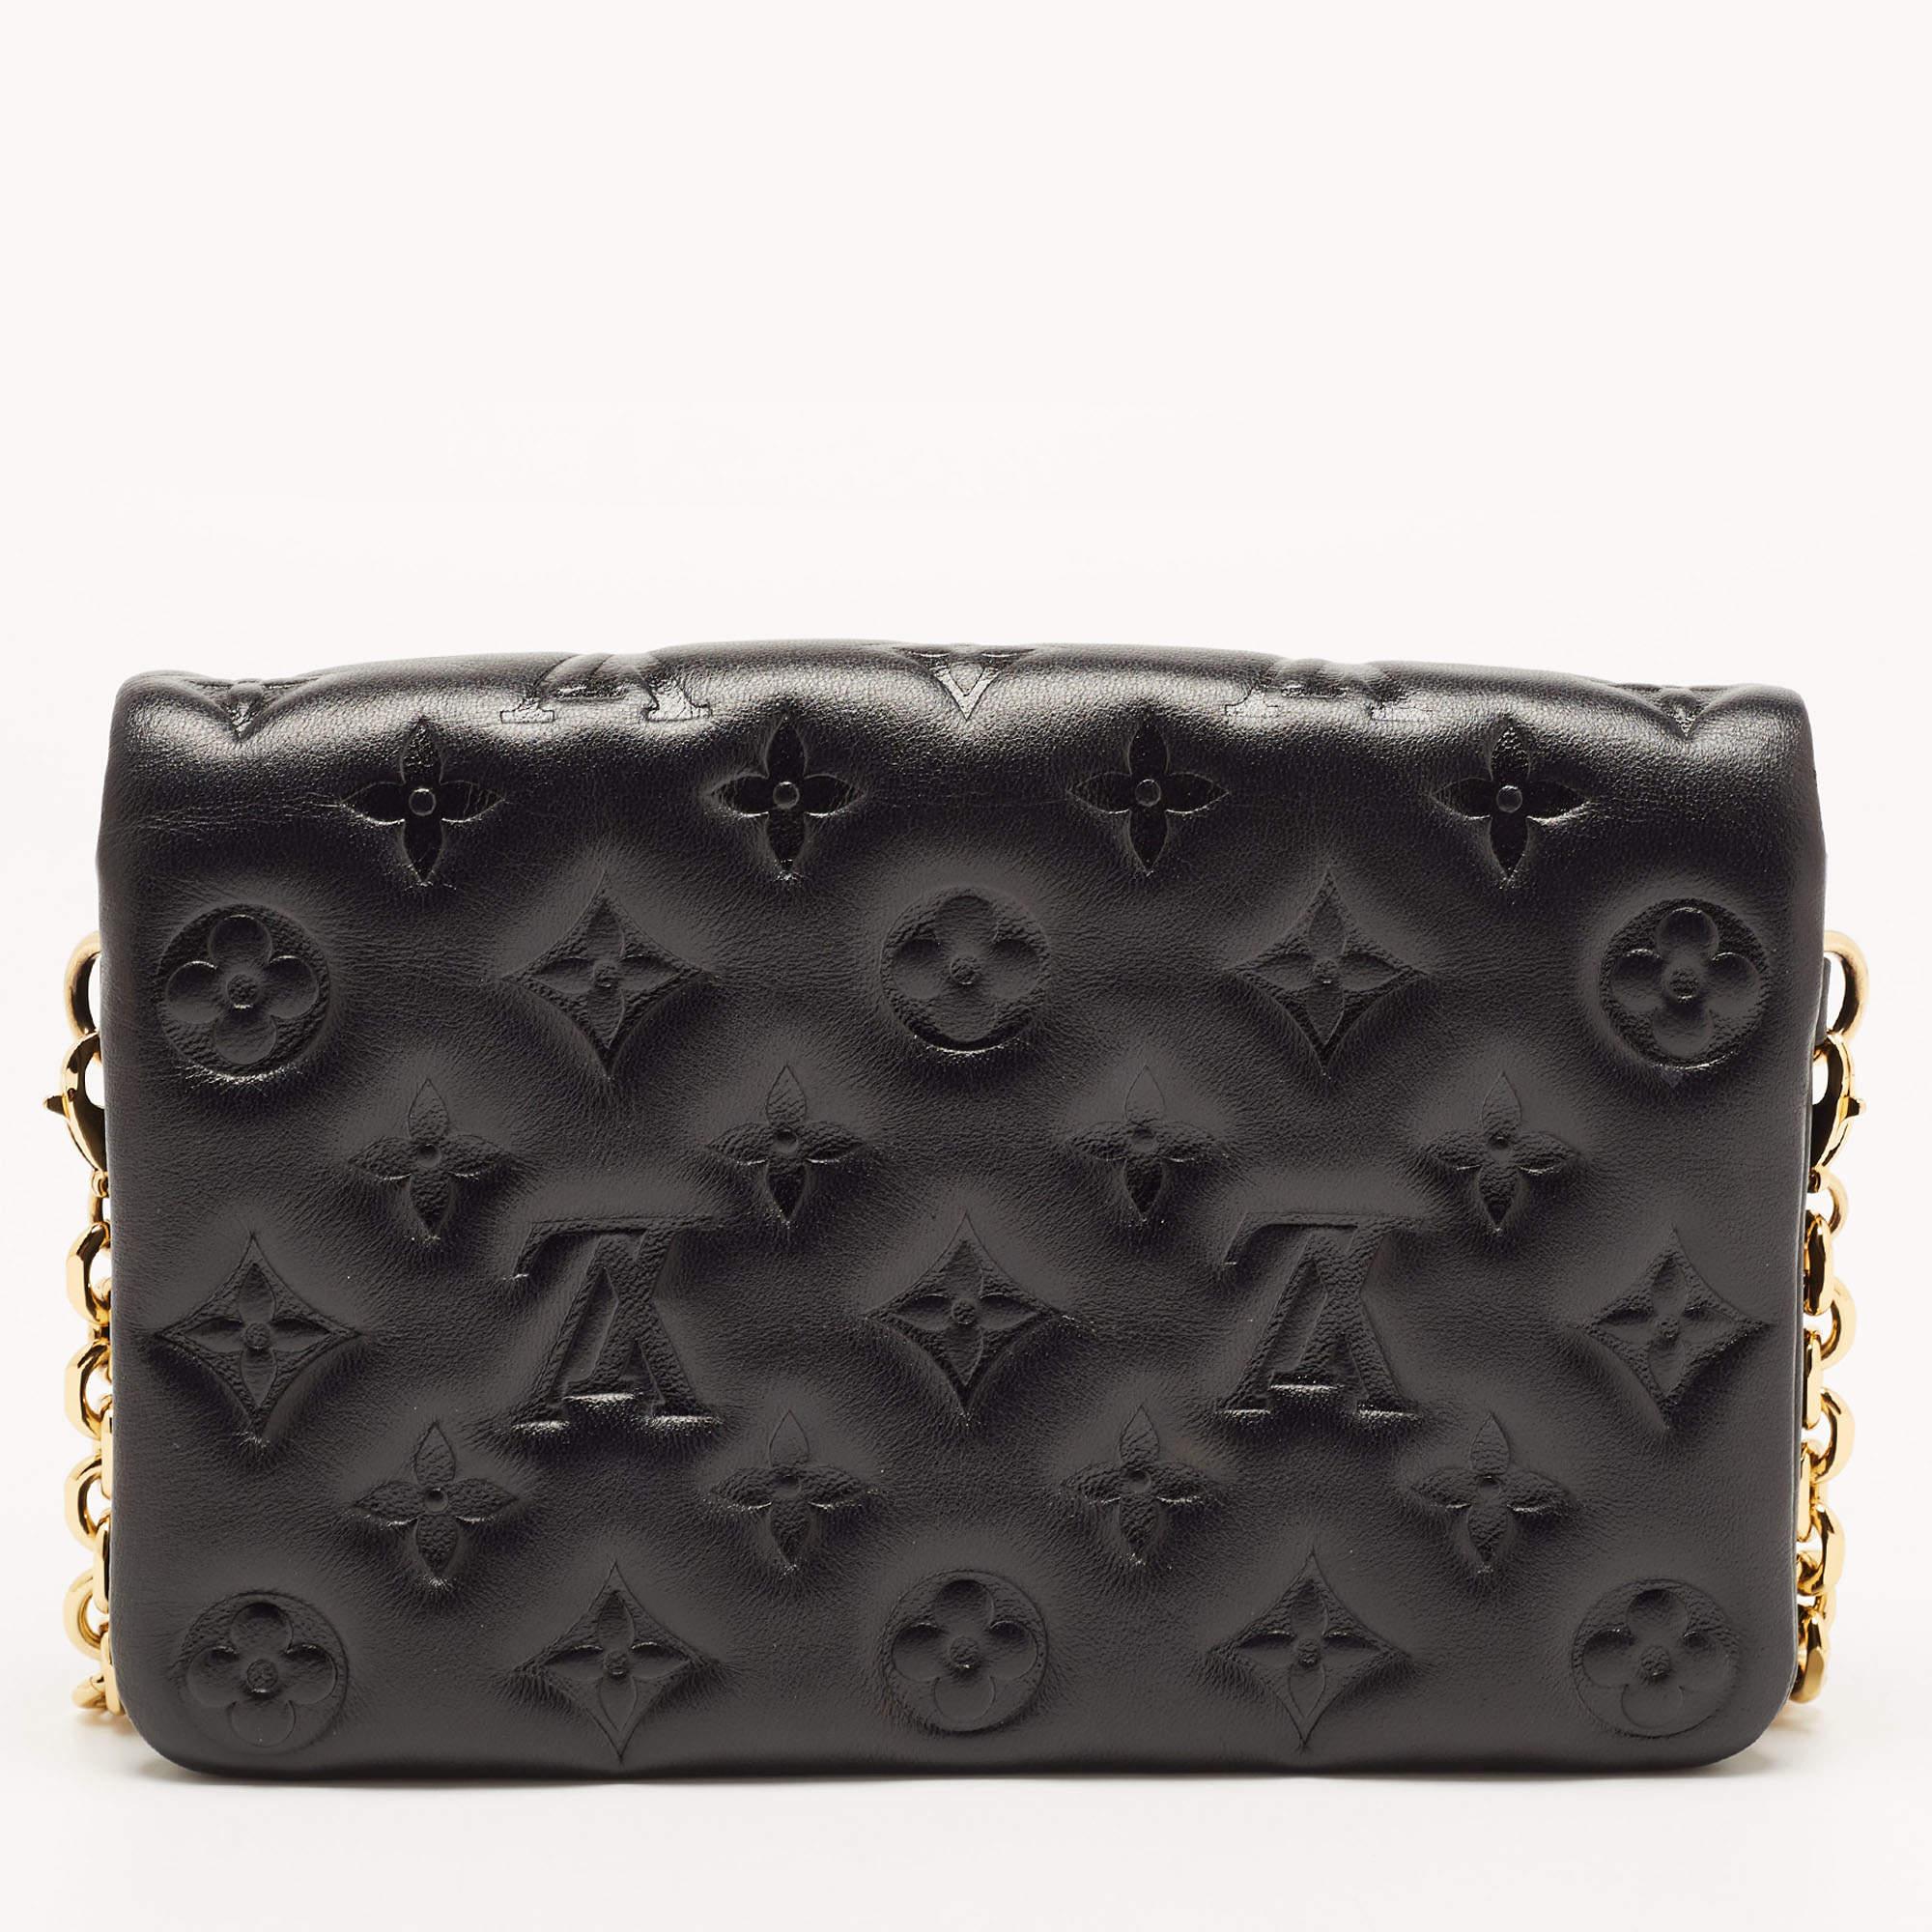 Louis Vuitton pochette Coussin is a monogram-laden accessory that is accompanied by a chain for shoulder or crossbody wear. This one here in black leather has a puffy exterior, an Alcantara interior, and gold-tone hardware.

Includes: Original